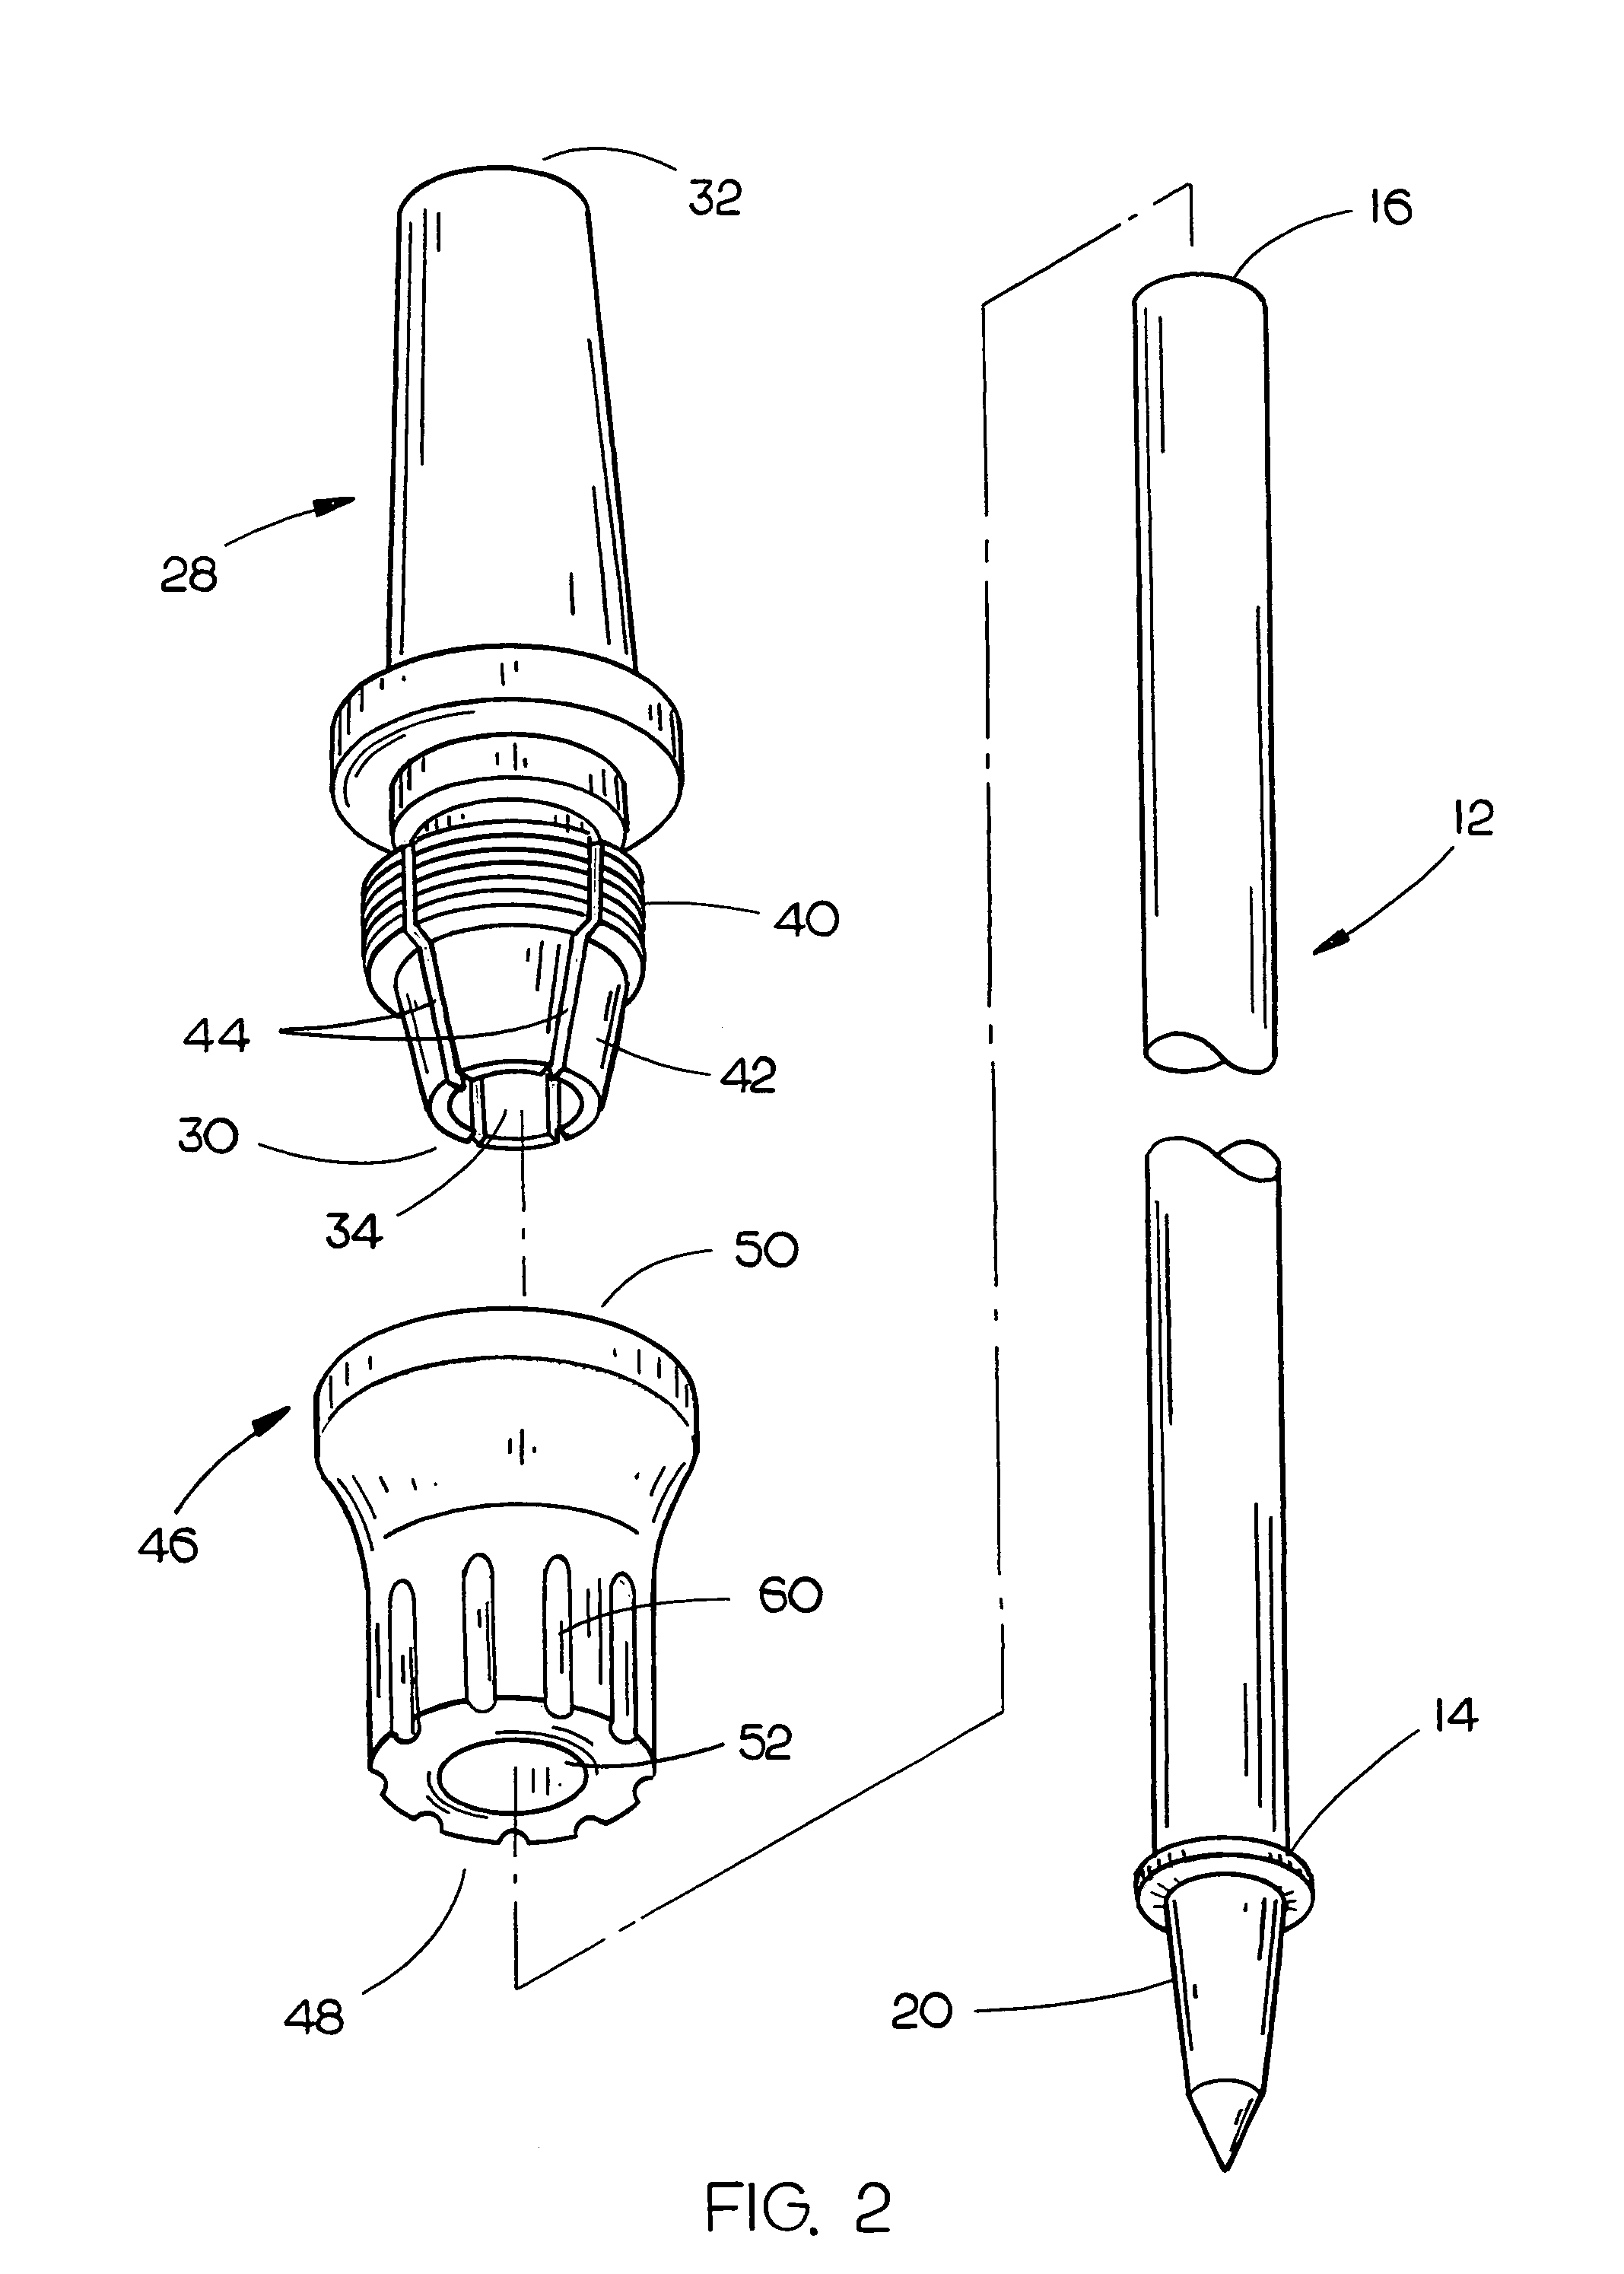 End pin for a stringed musical instrument or other acoustic device